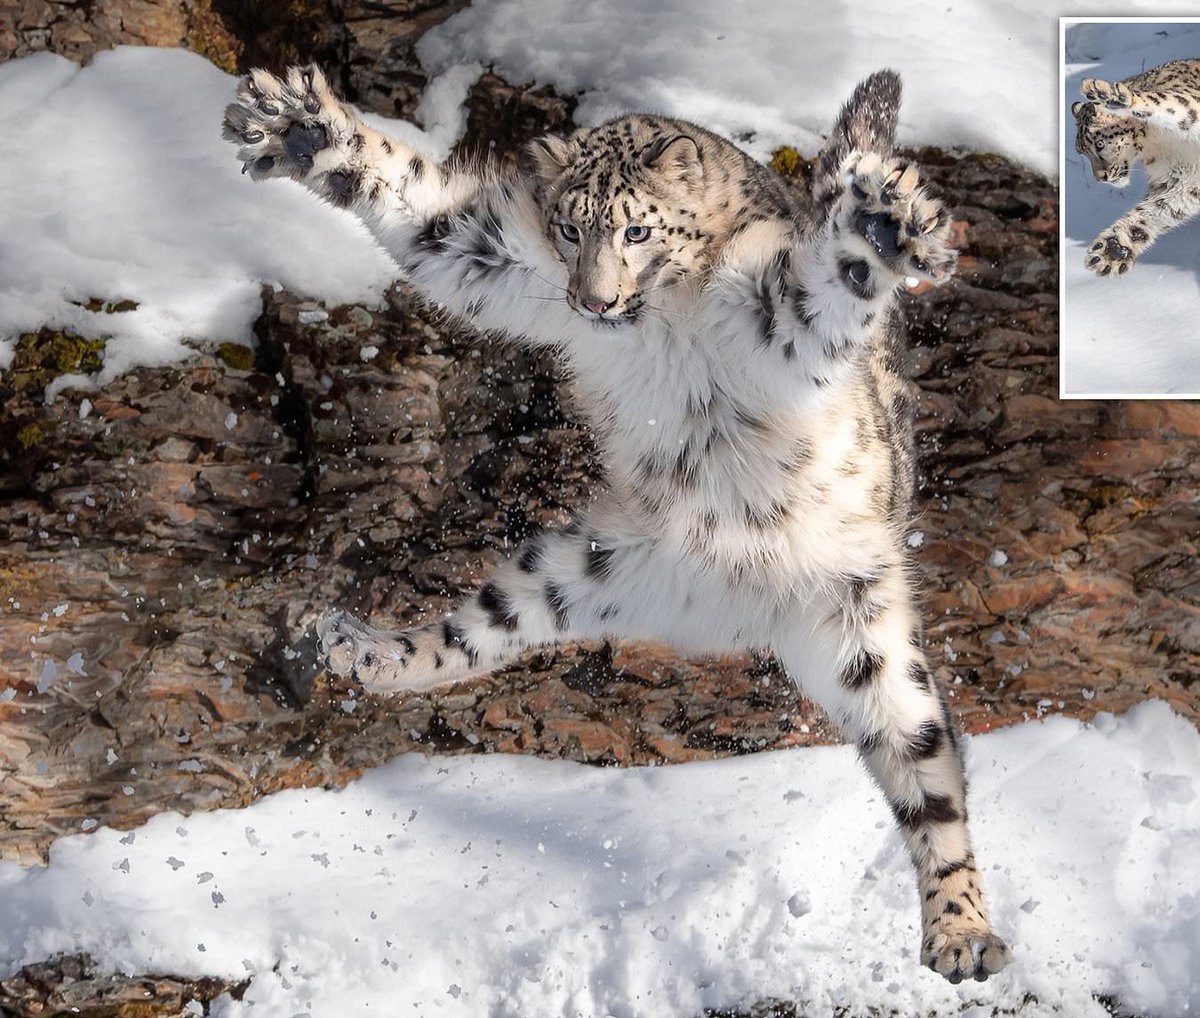 Snow leopards have really powerful legs and can leap as far as 50 feet. Vertically they’re able to jump about 20 feet.